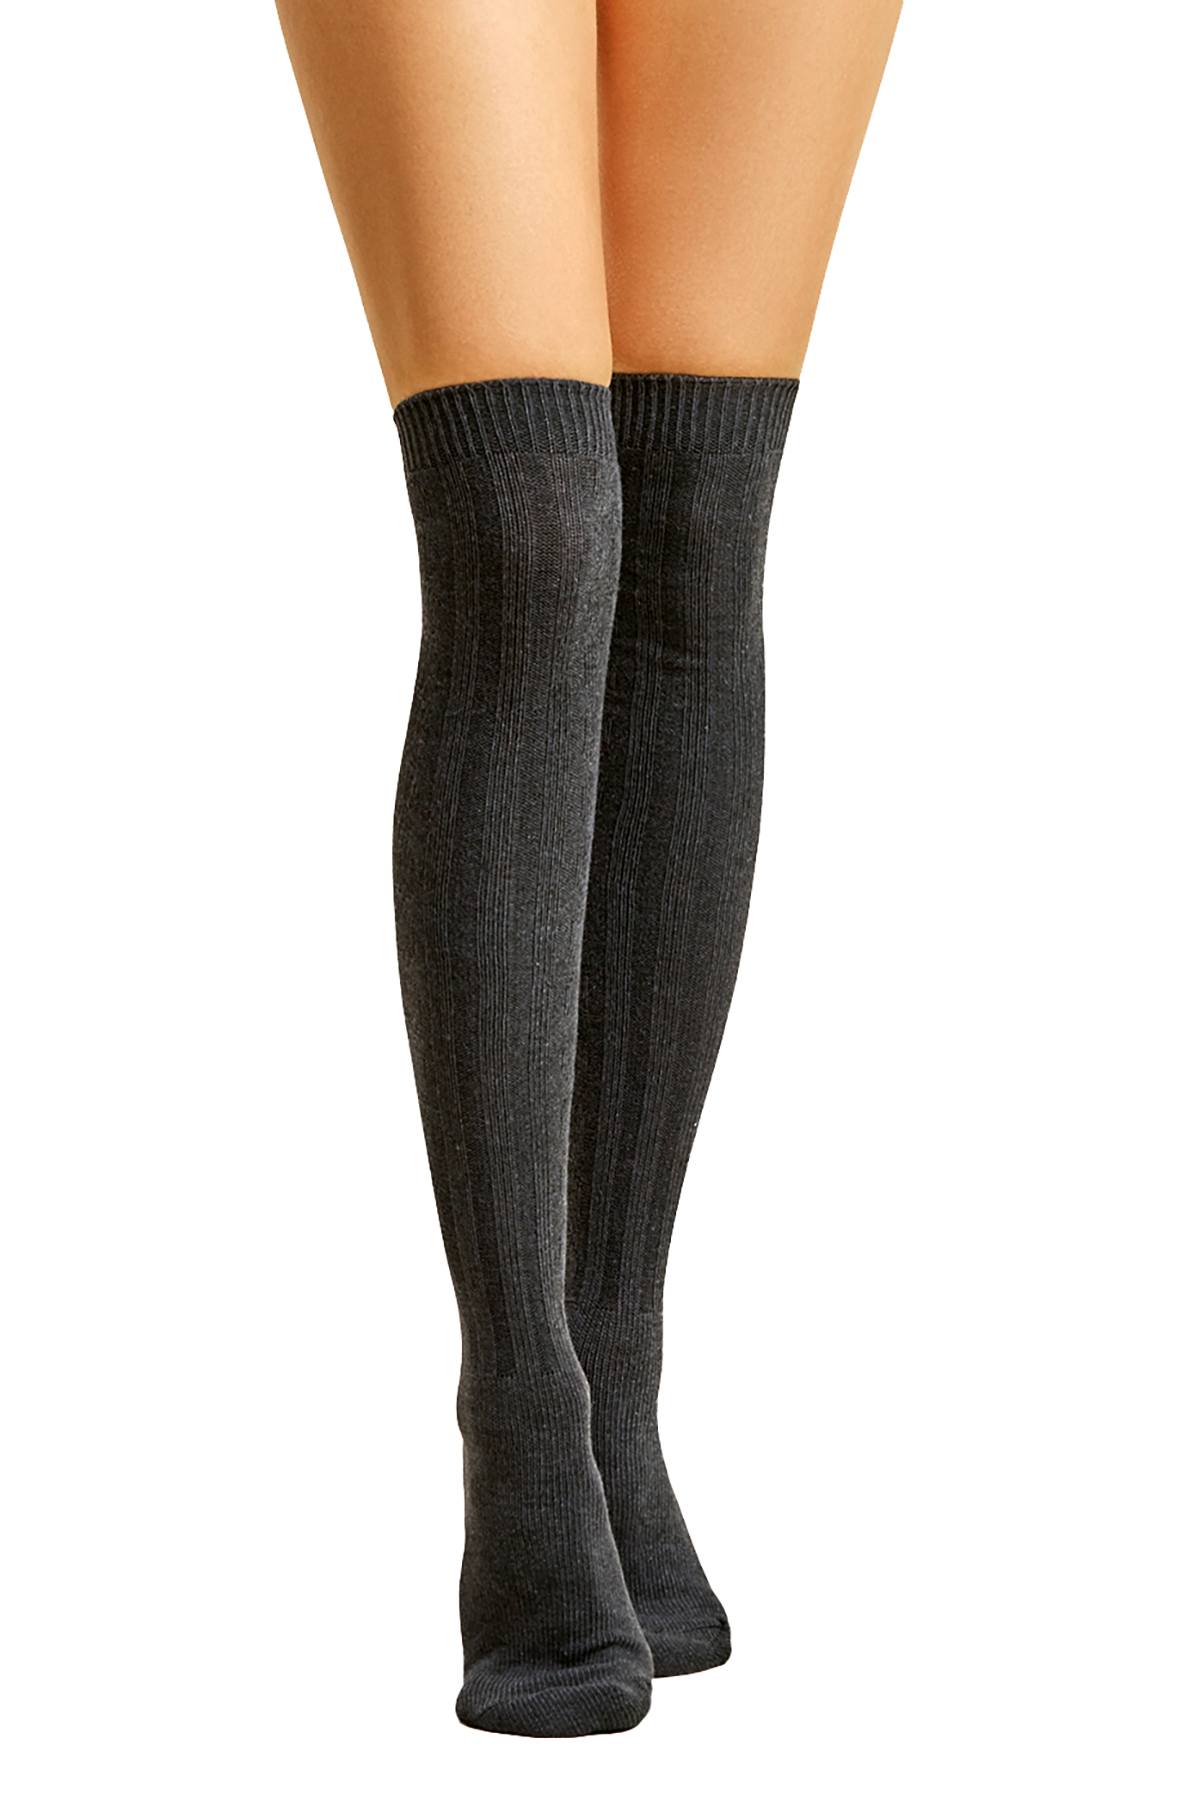 Women's Charcoal Cable Over The Knee Socks